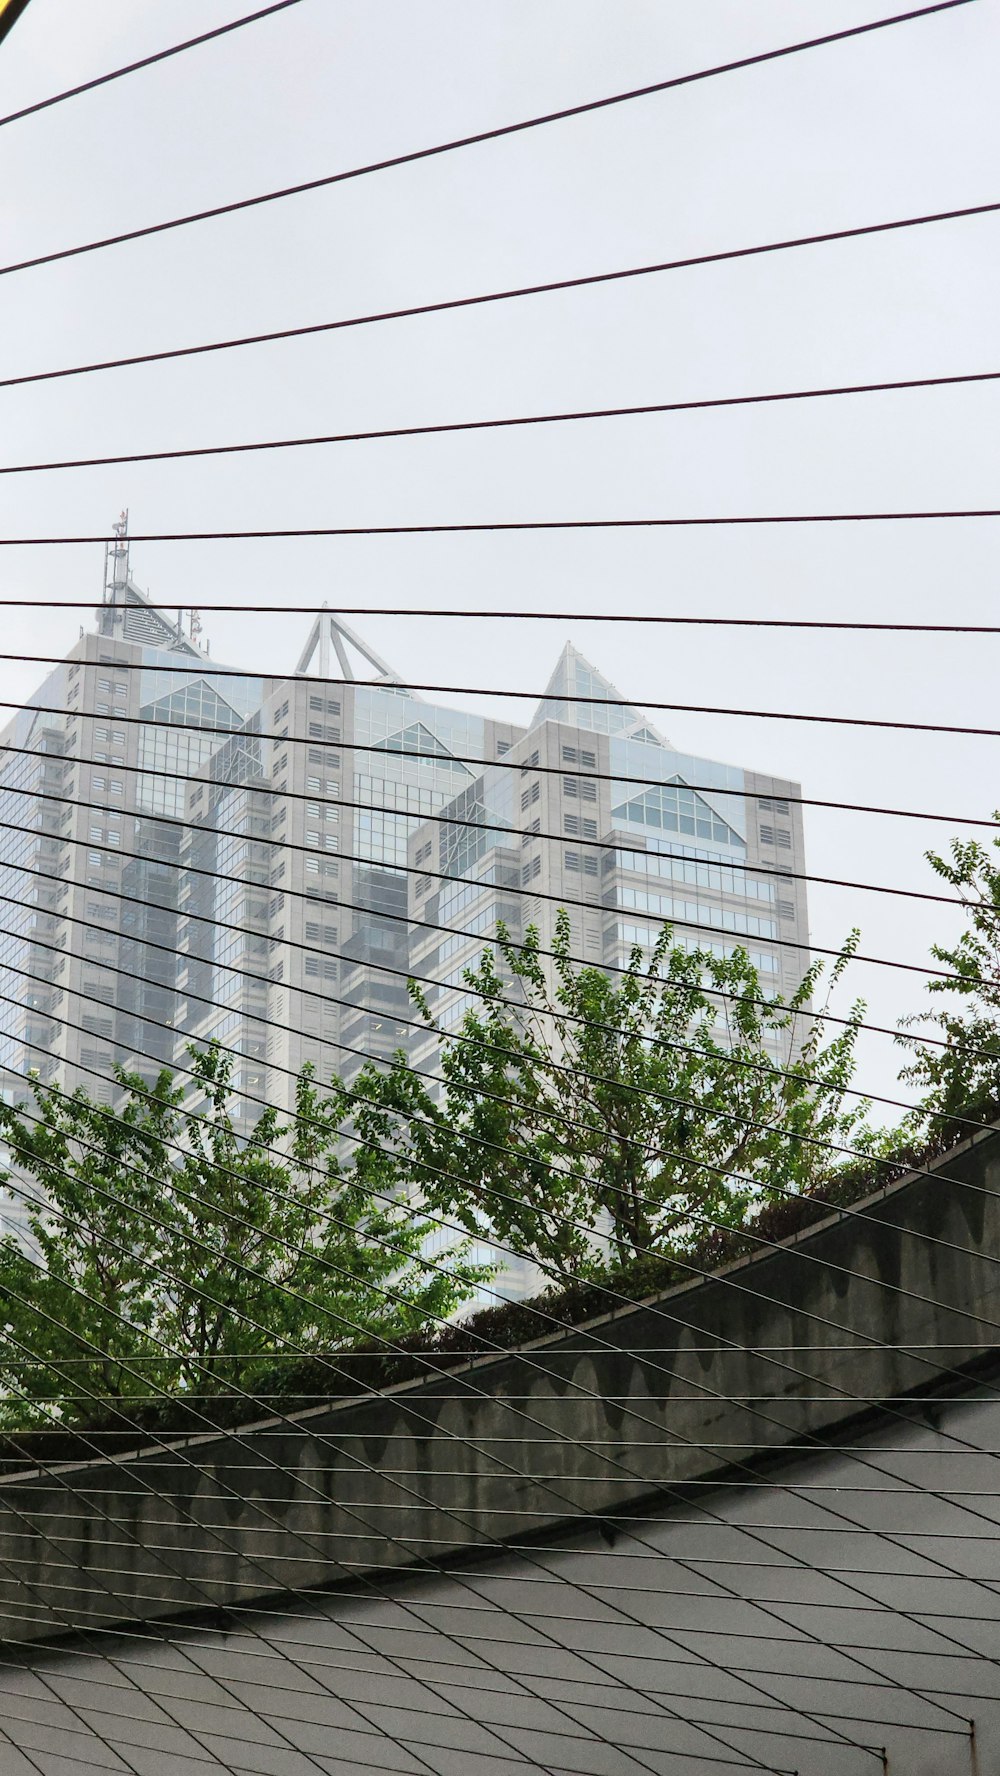 a view of a very tall building through some wires